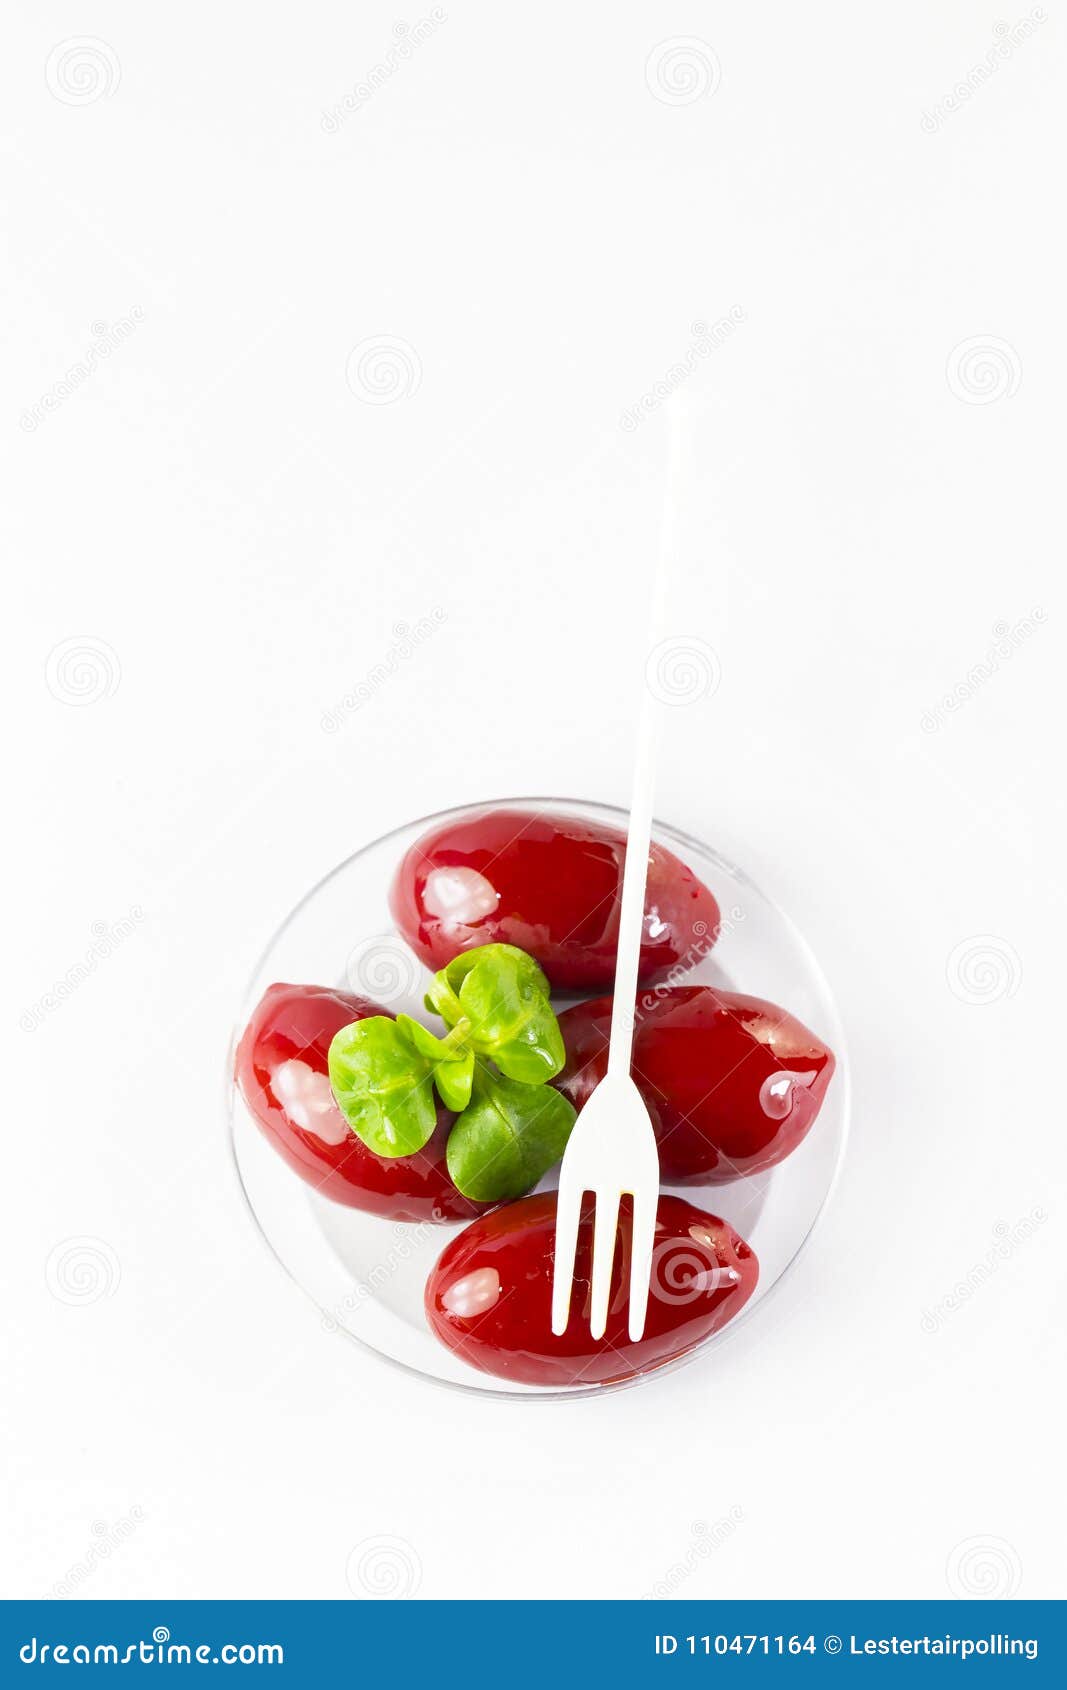 olives in a small plastic plate